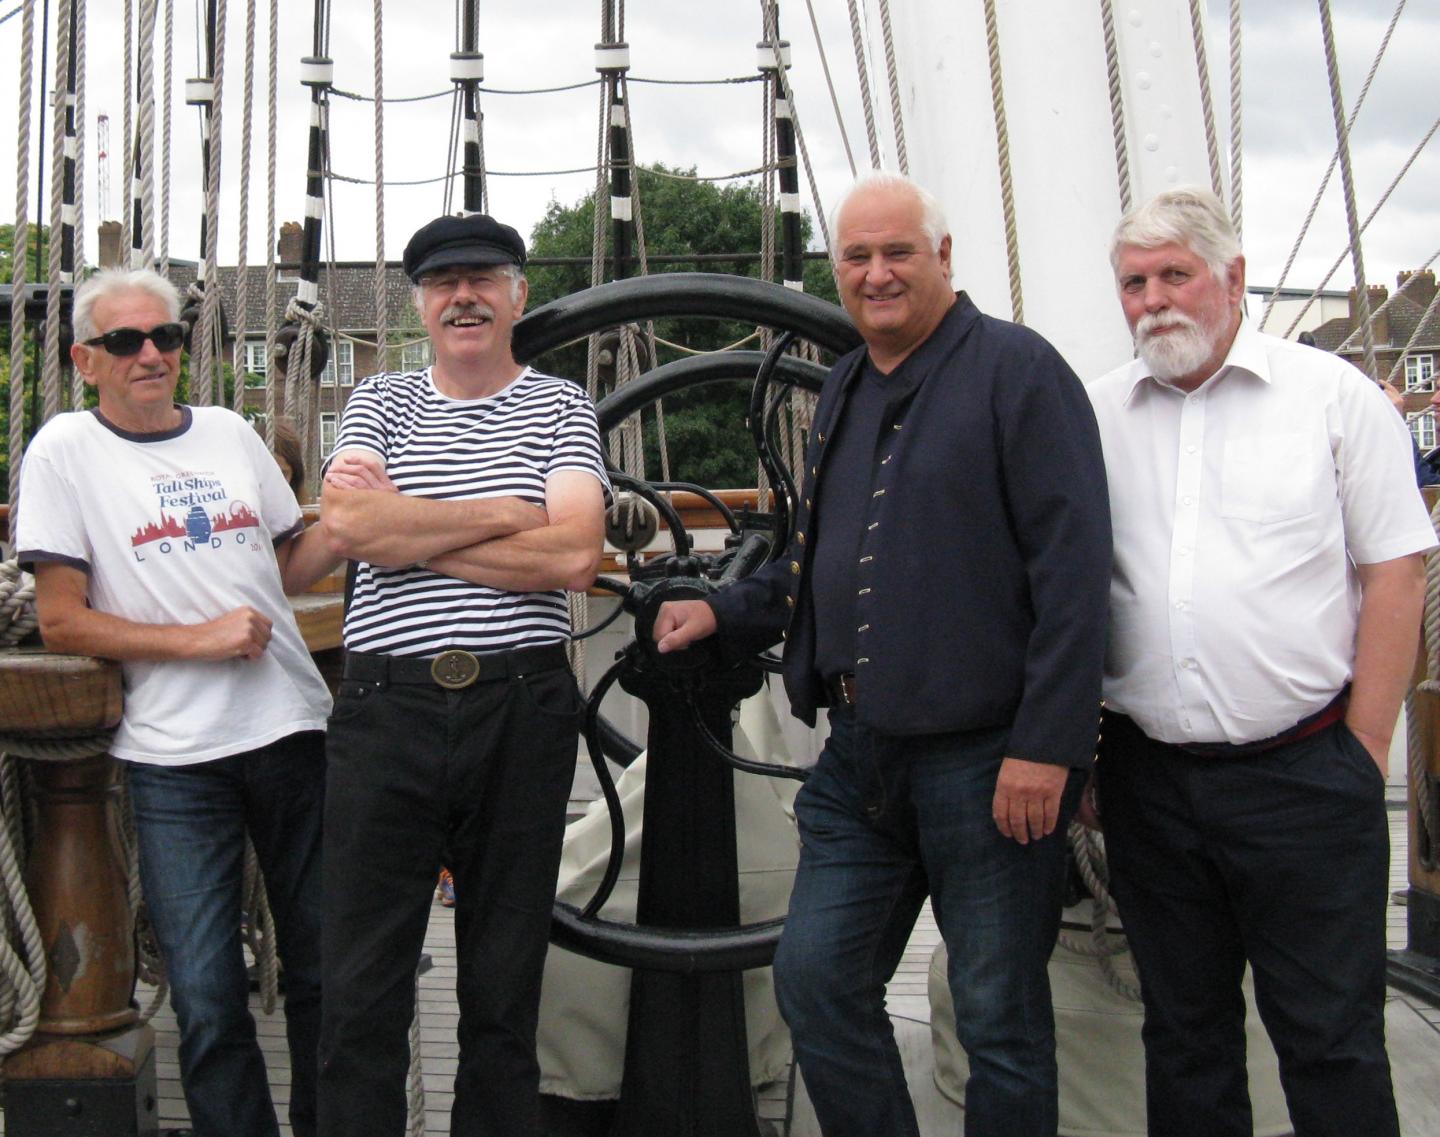 A group photo of sea shanty singers Swinging the Lead on board Cutty Sark